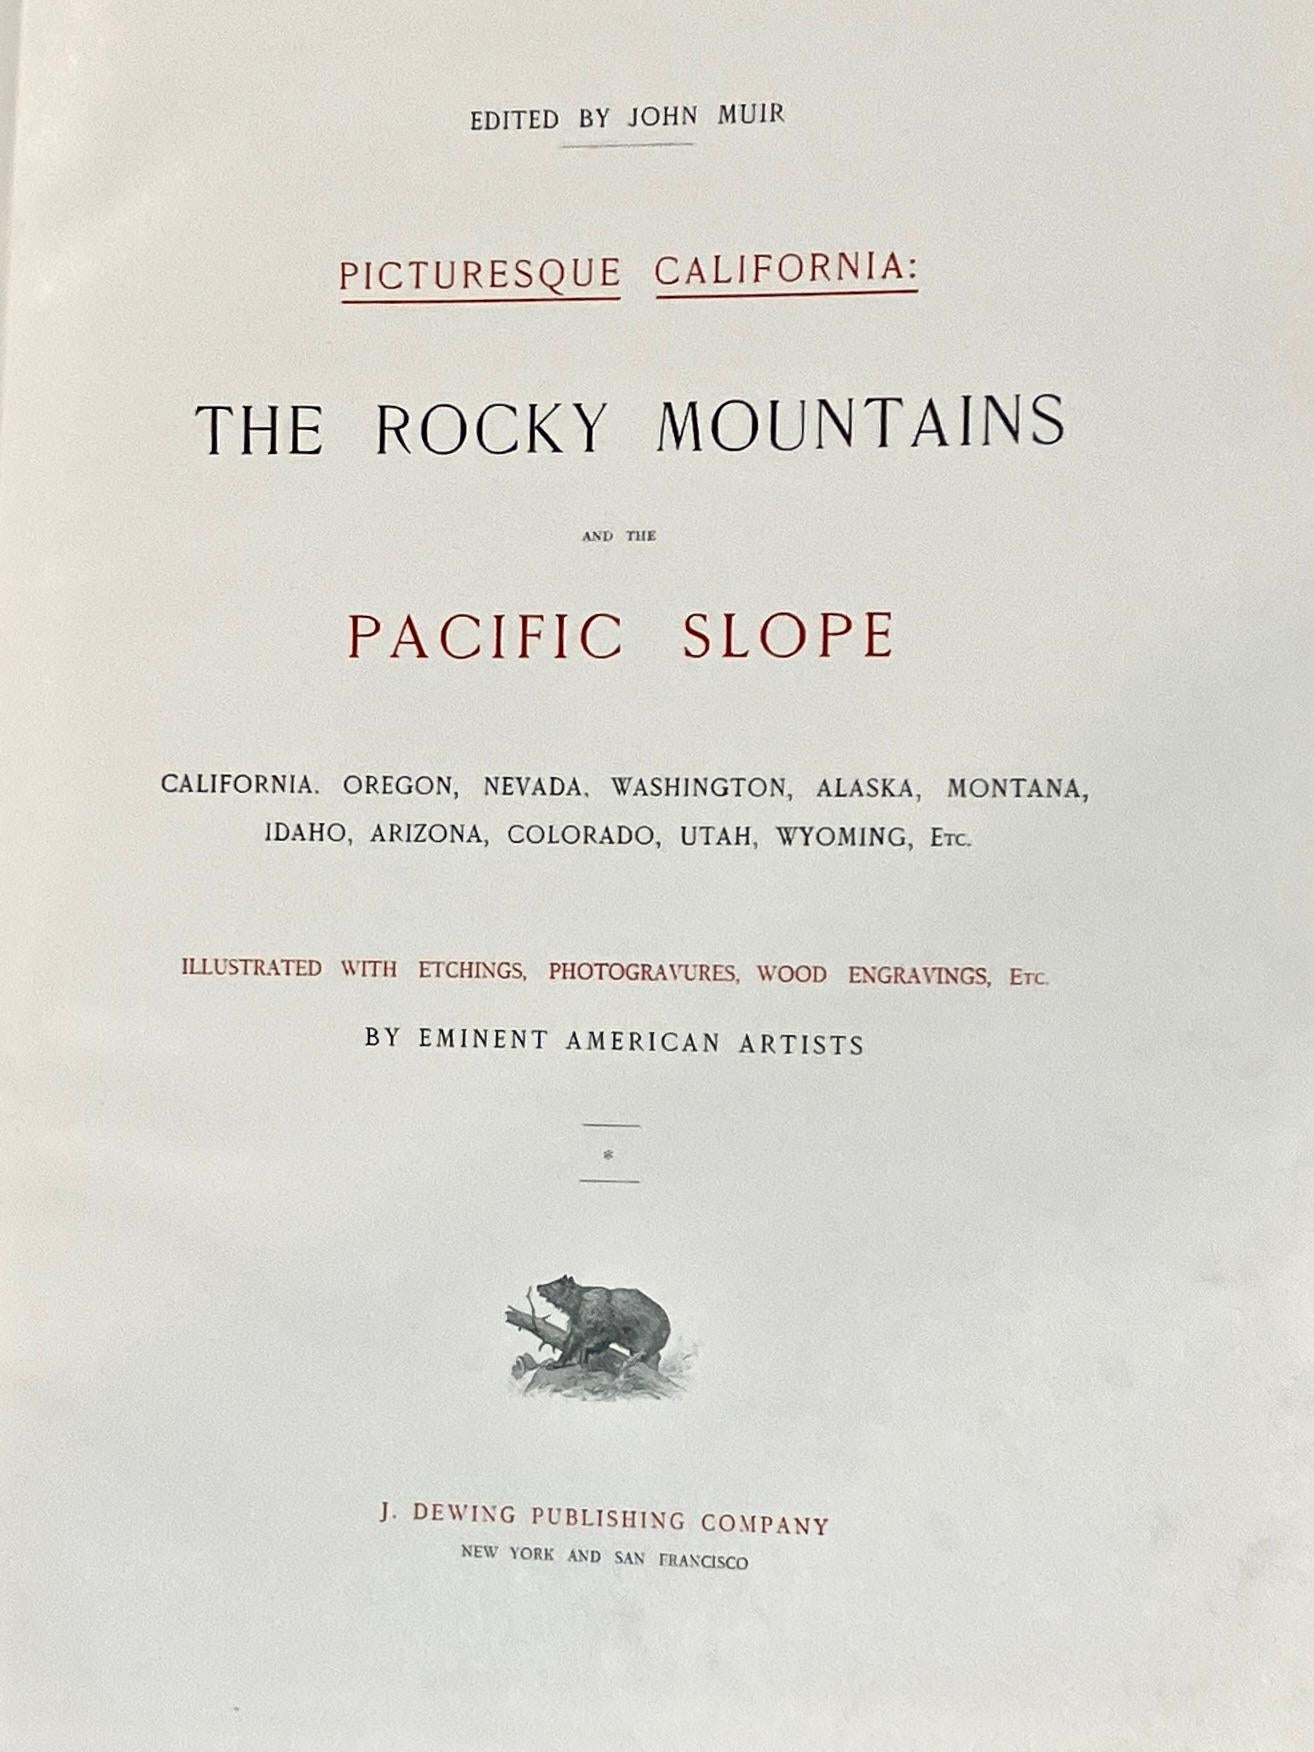 John Muir Editor, Picturesque California, The Rocky Mountains & Pacific Slope In Good Condition For Sale In San Francisco, CA